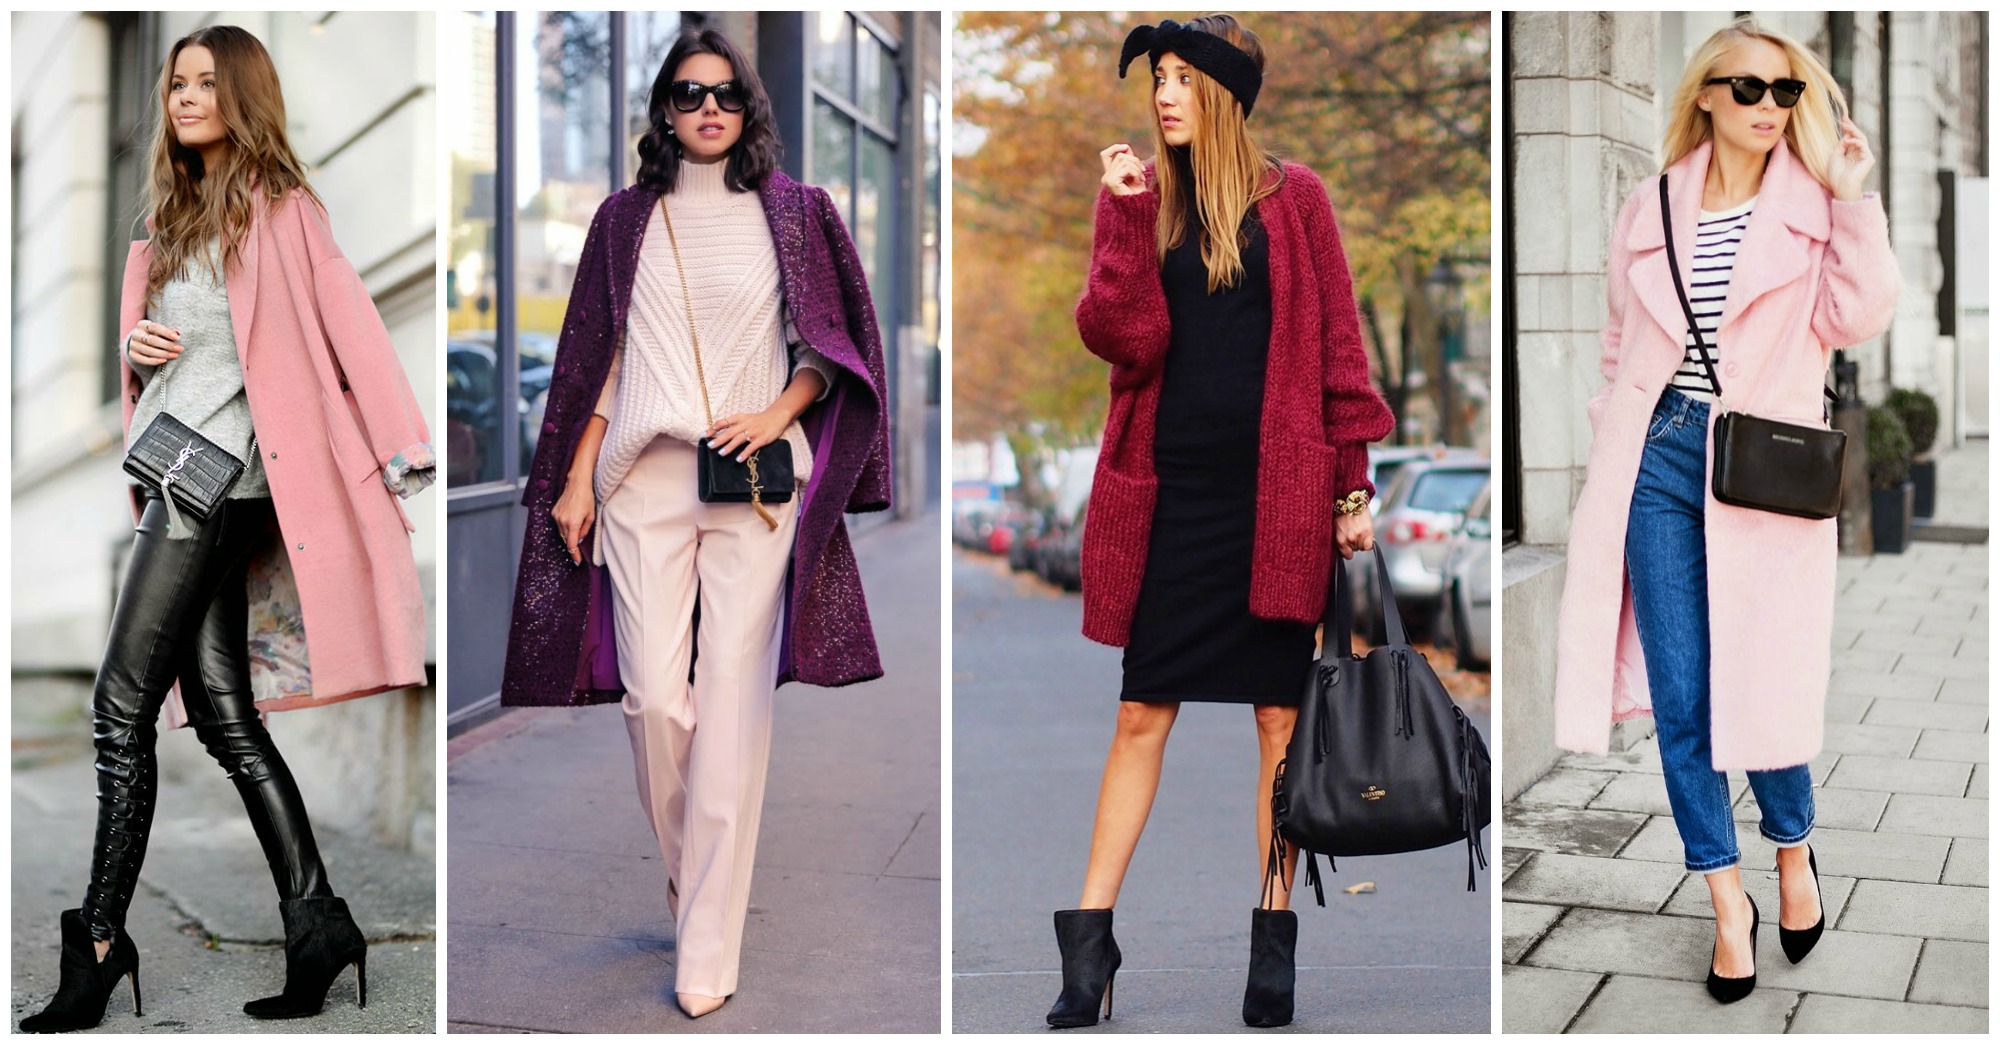 Classy and Elegant Street Style Outfits to Wear Now